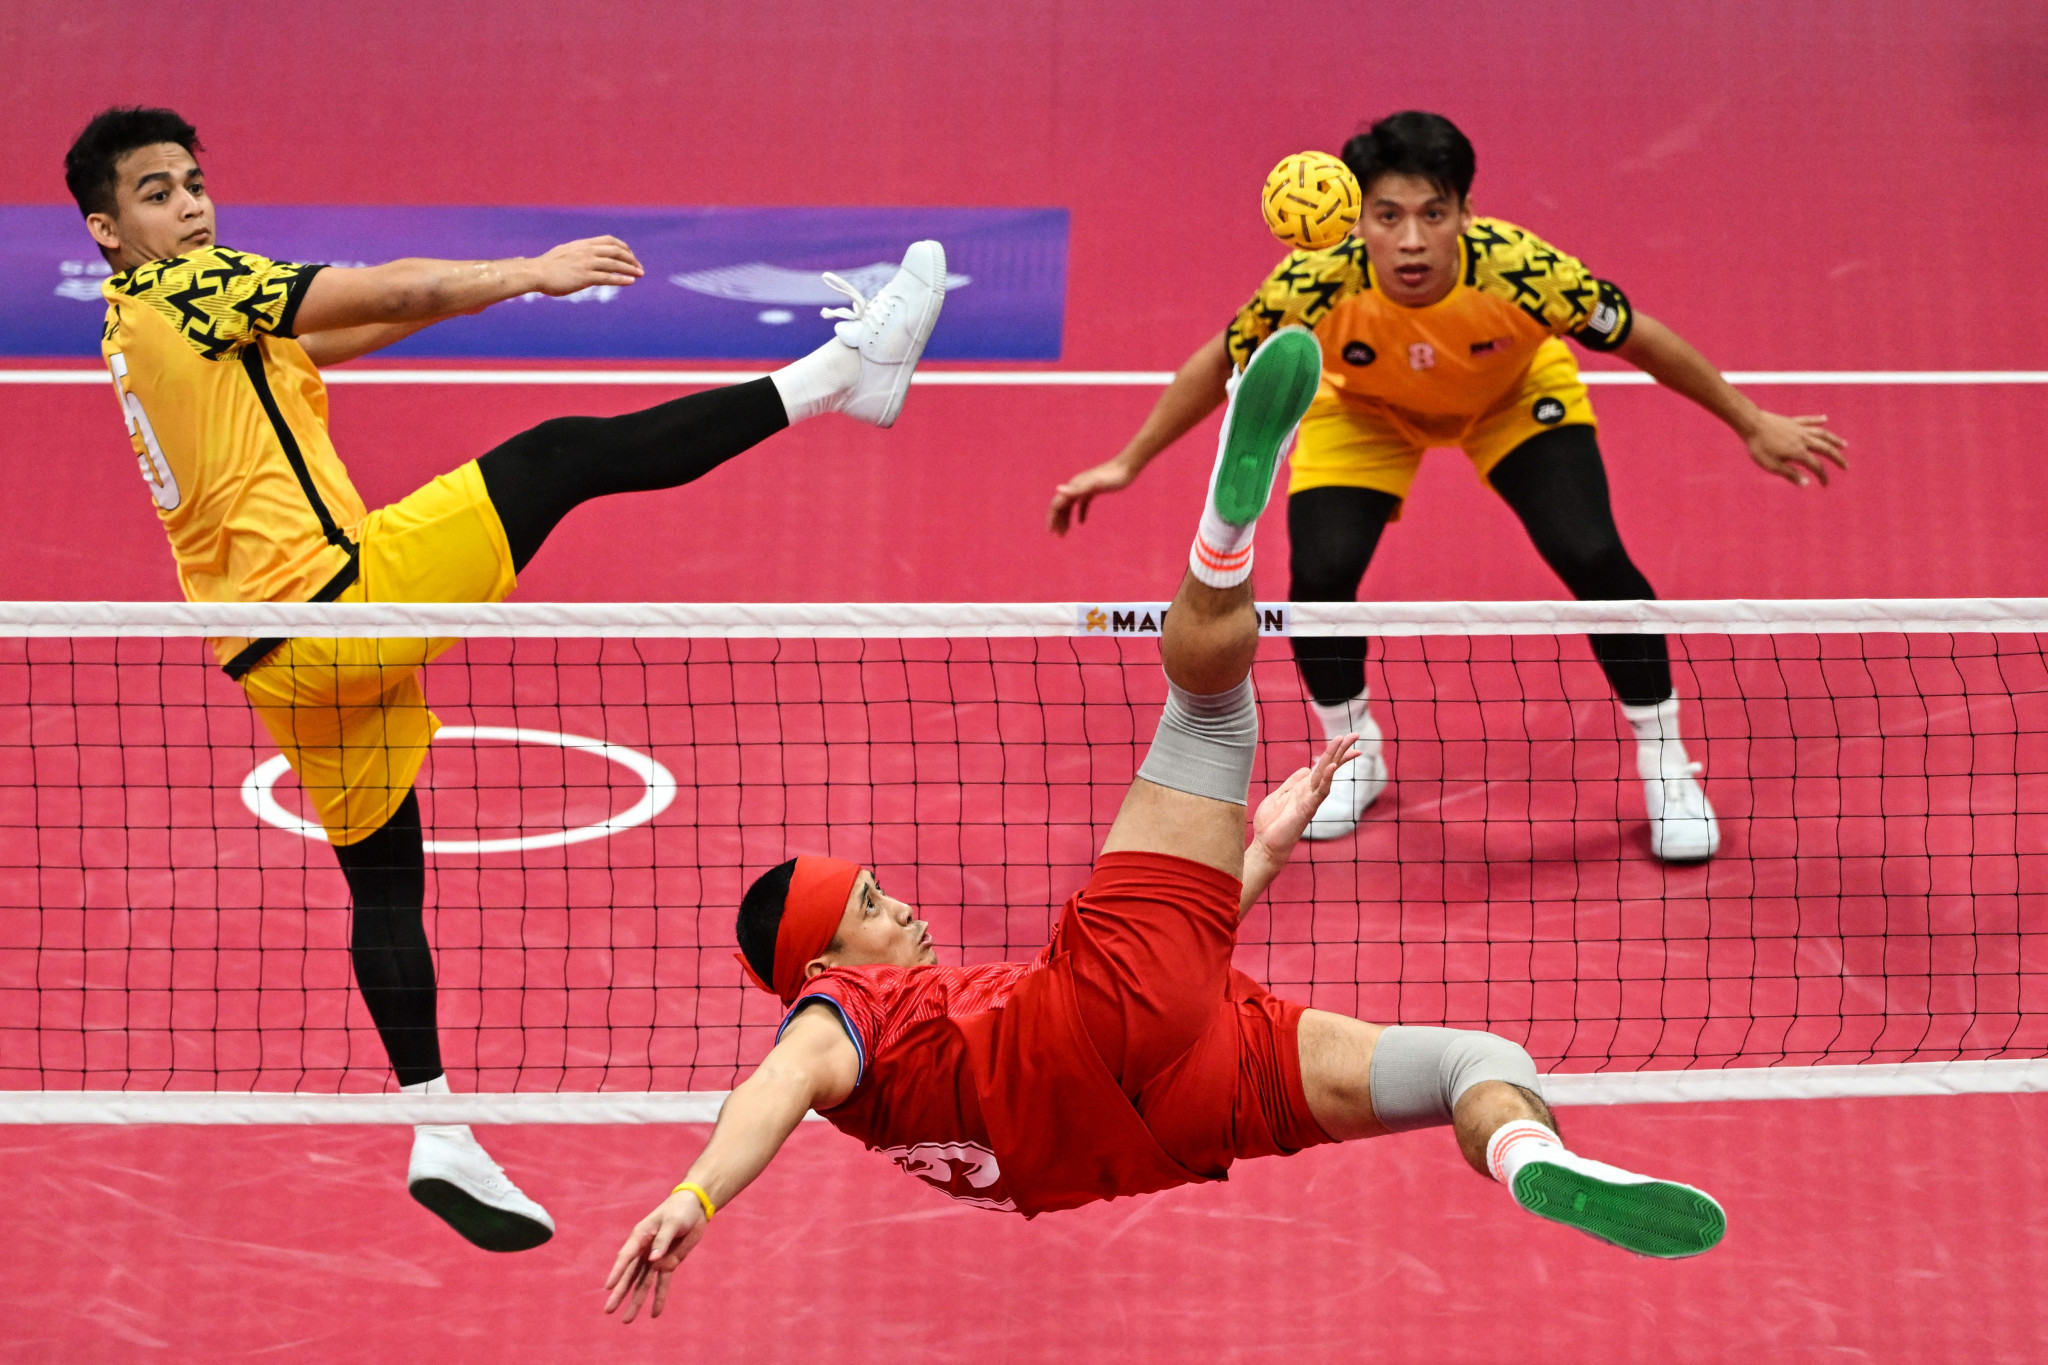  Varayut Jantarasena produces another acrobatic effort in Thailand's victory over Malaysia to win sepak takraw gold ©Getty Images